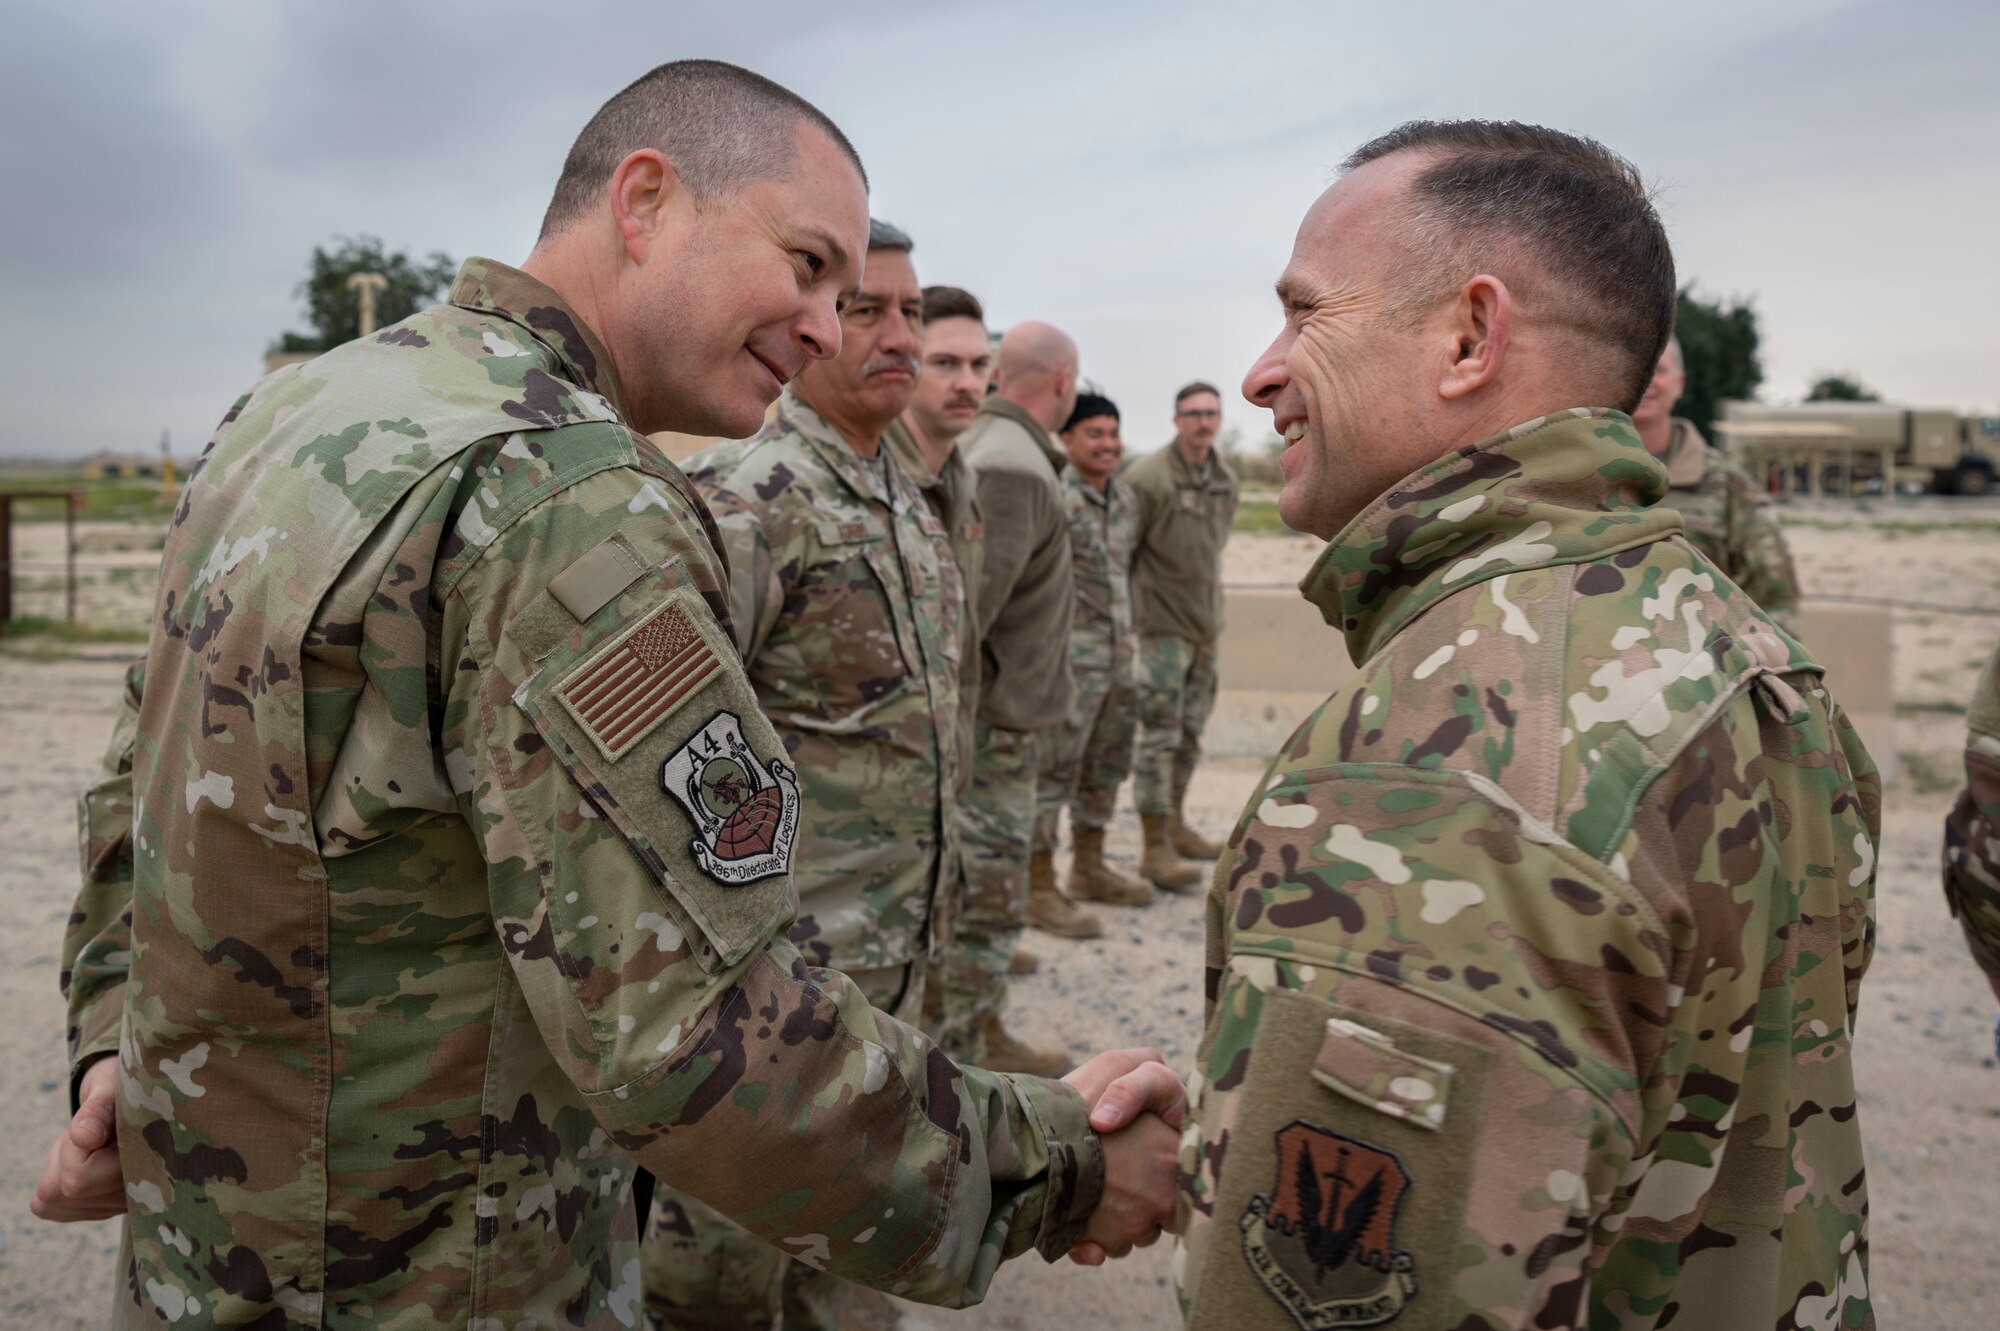 U.S. Air Force Command Chief Master Sgt. John Storms, right, Air Combat Command, greets Chief Master Sgt. Michael Reid, 386th Air Expeditionary Wing A4 senior enlisted leader, during a tour at Ali Al Salem Air Base, Kuwait, Feb. 15, 2023.